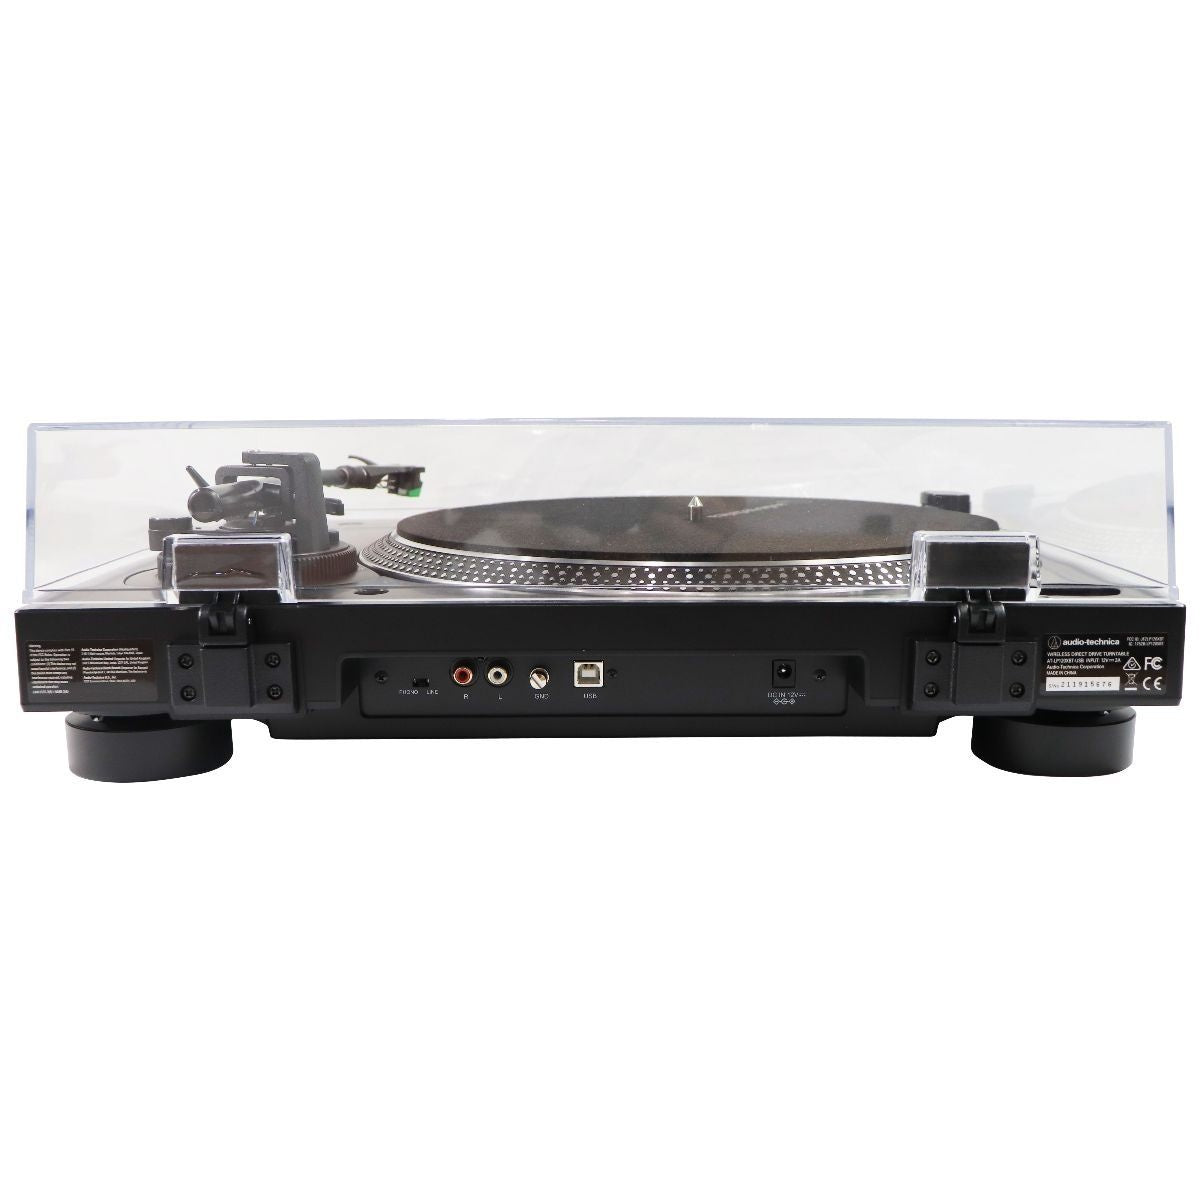 Audio-Technica AT-LP120XBT-USB Wireless Direct-Drive Turntable - Black Home Audio Stereos, Components - Record Players/Home Turntables Audio-Technica    - Simple Cell Bulk Wholesale Pricing - USA Seller